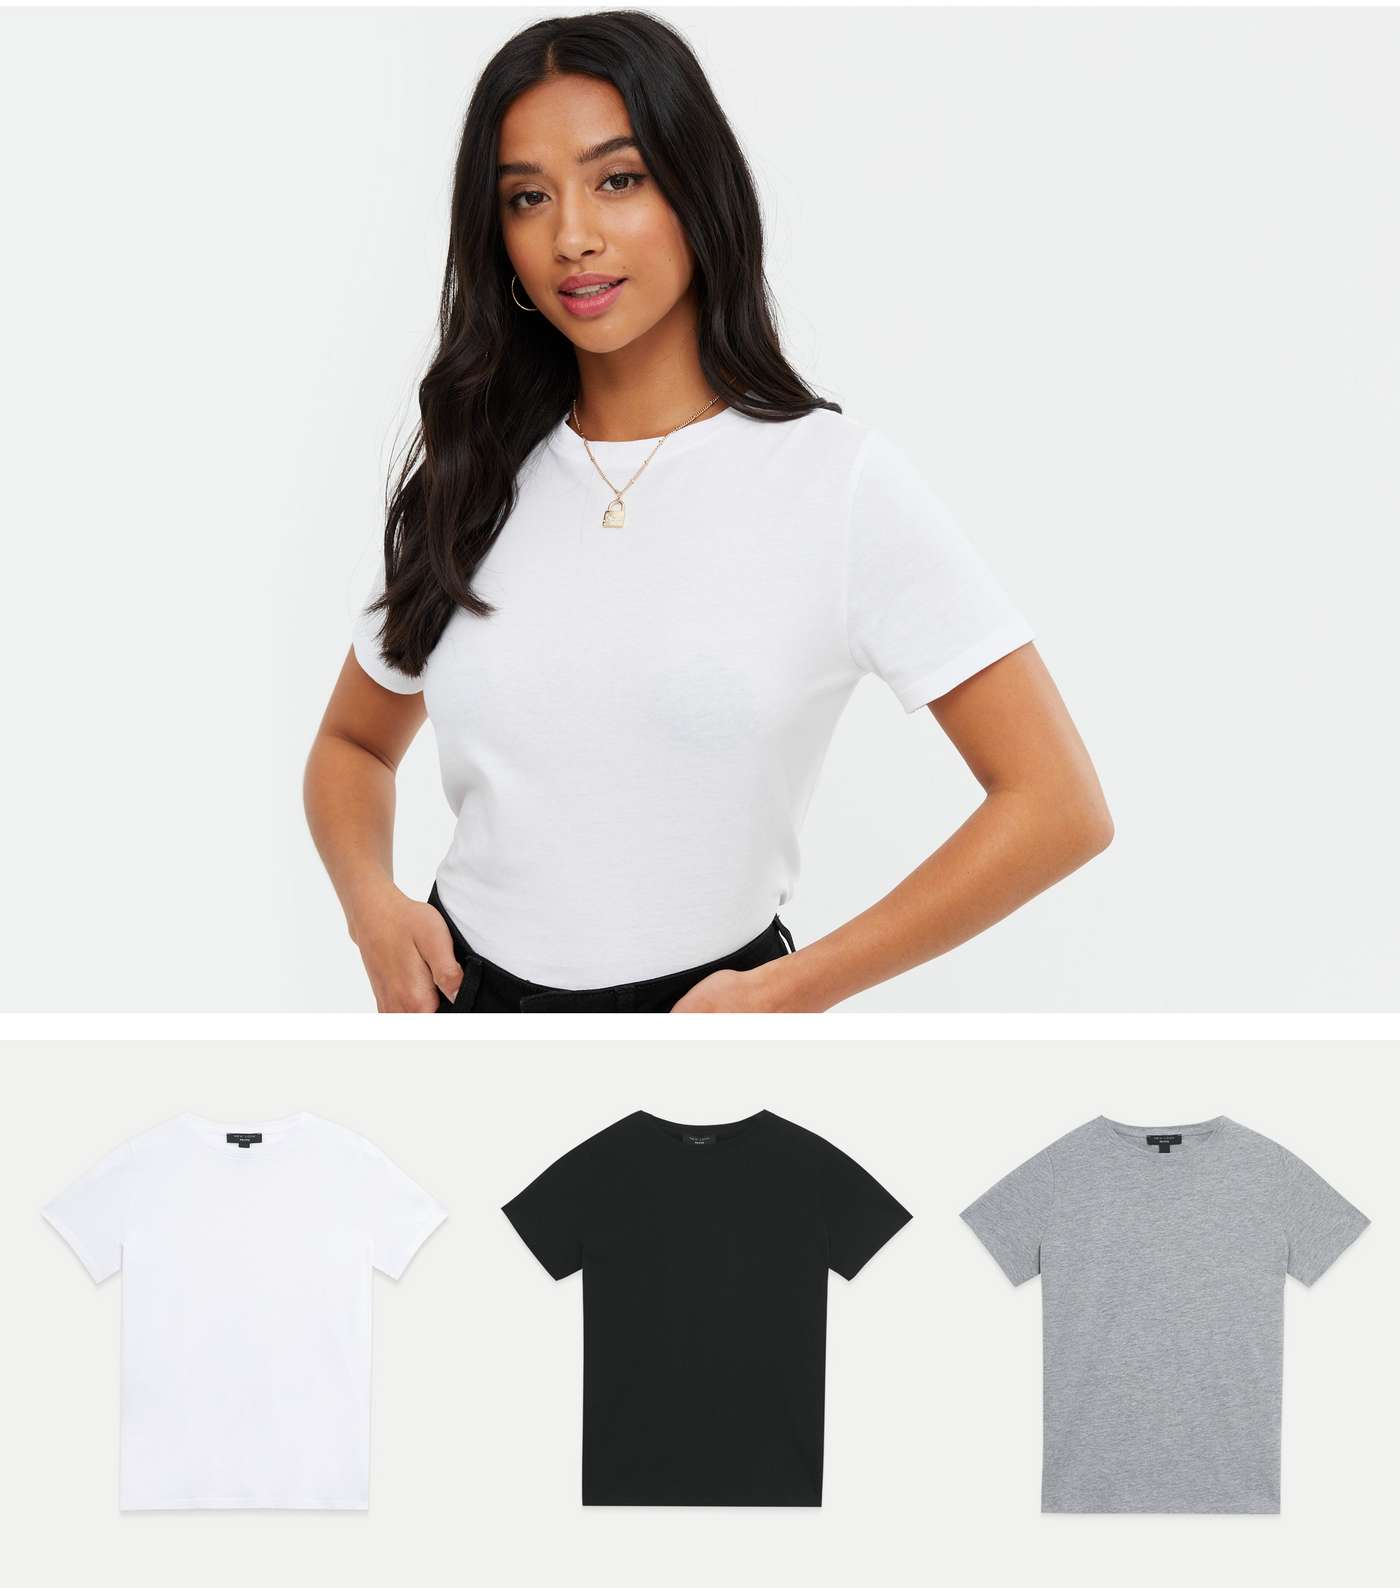 Petite 3 Pack Black White and Grey Crew Neck T-Shirts